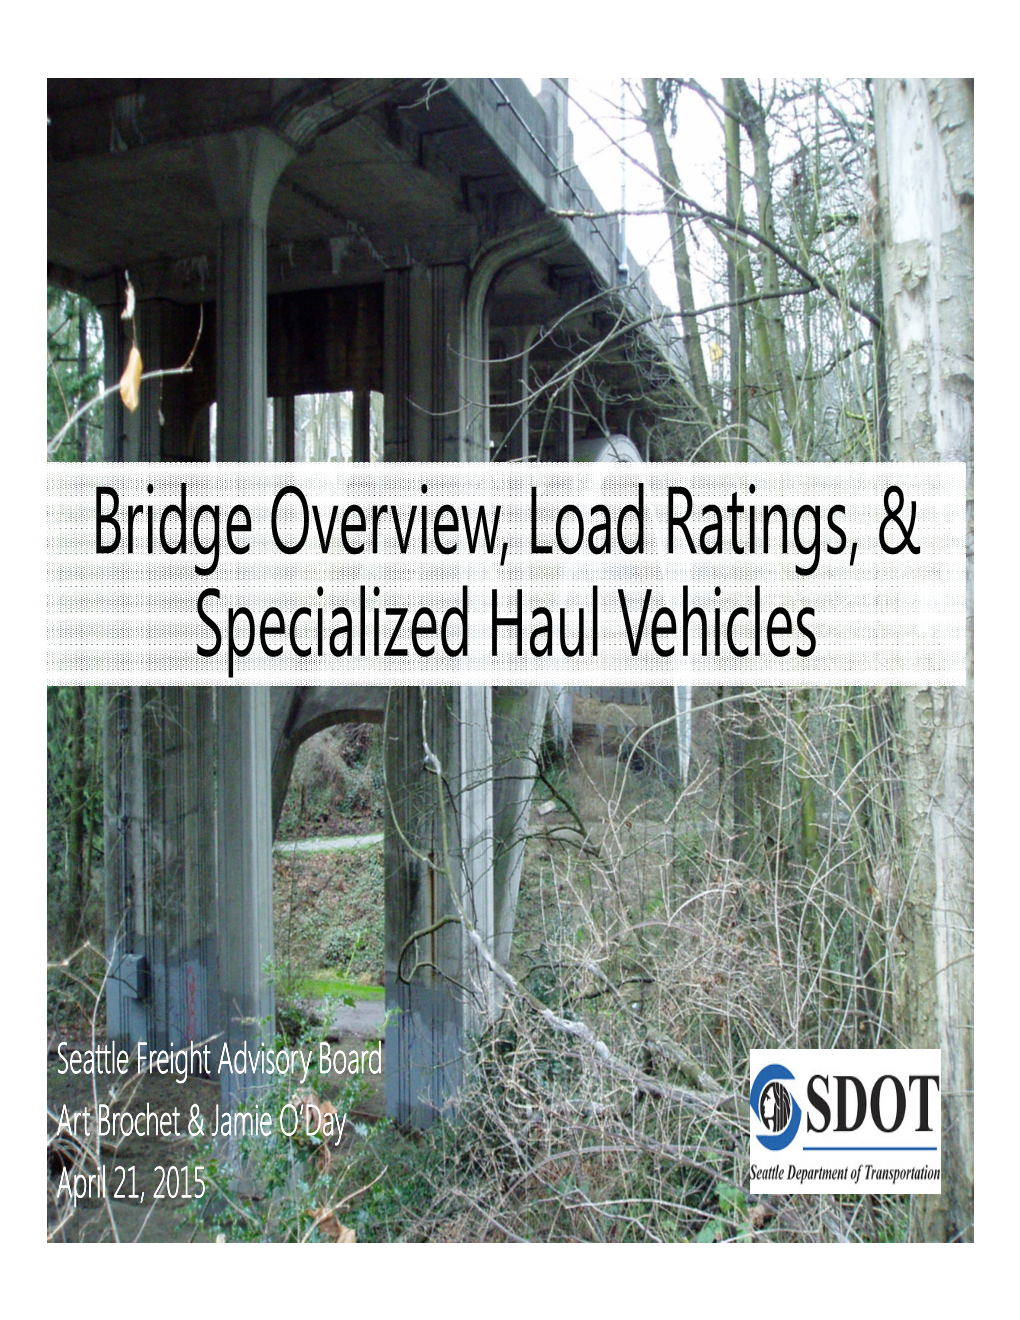 Bridge Overview, Load Ratings, & Specialized Haul Vehicles